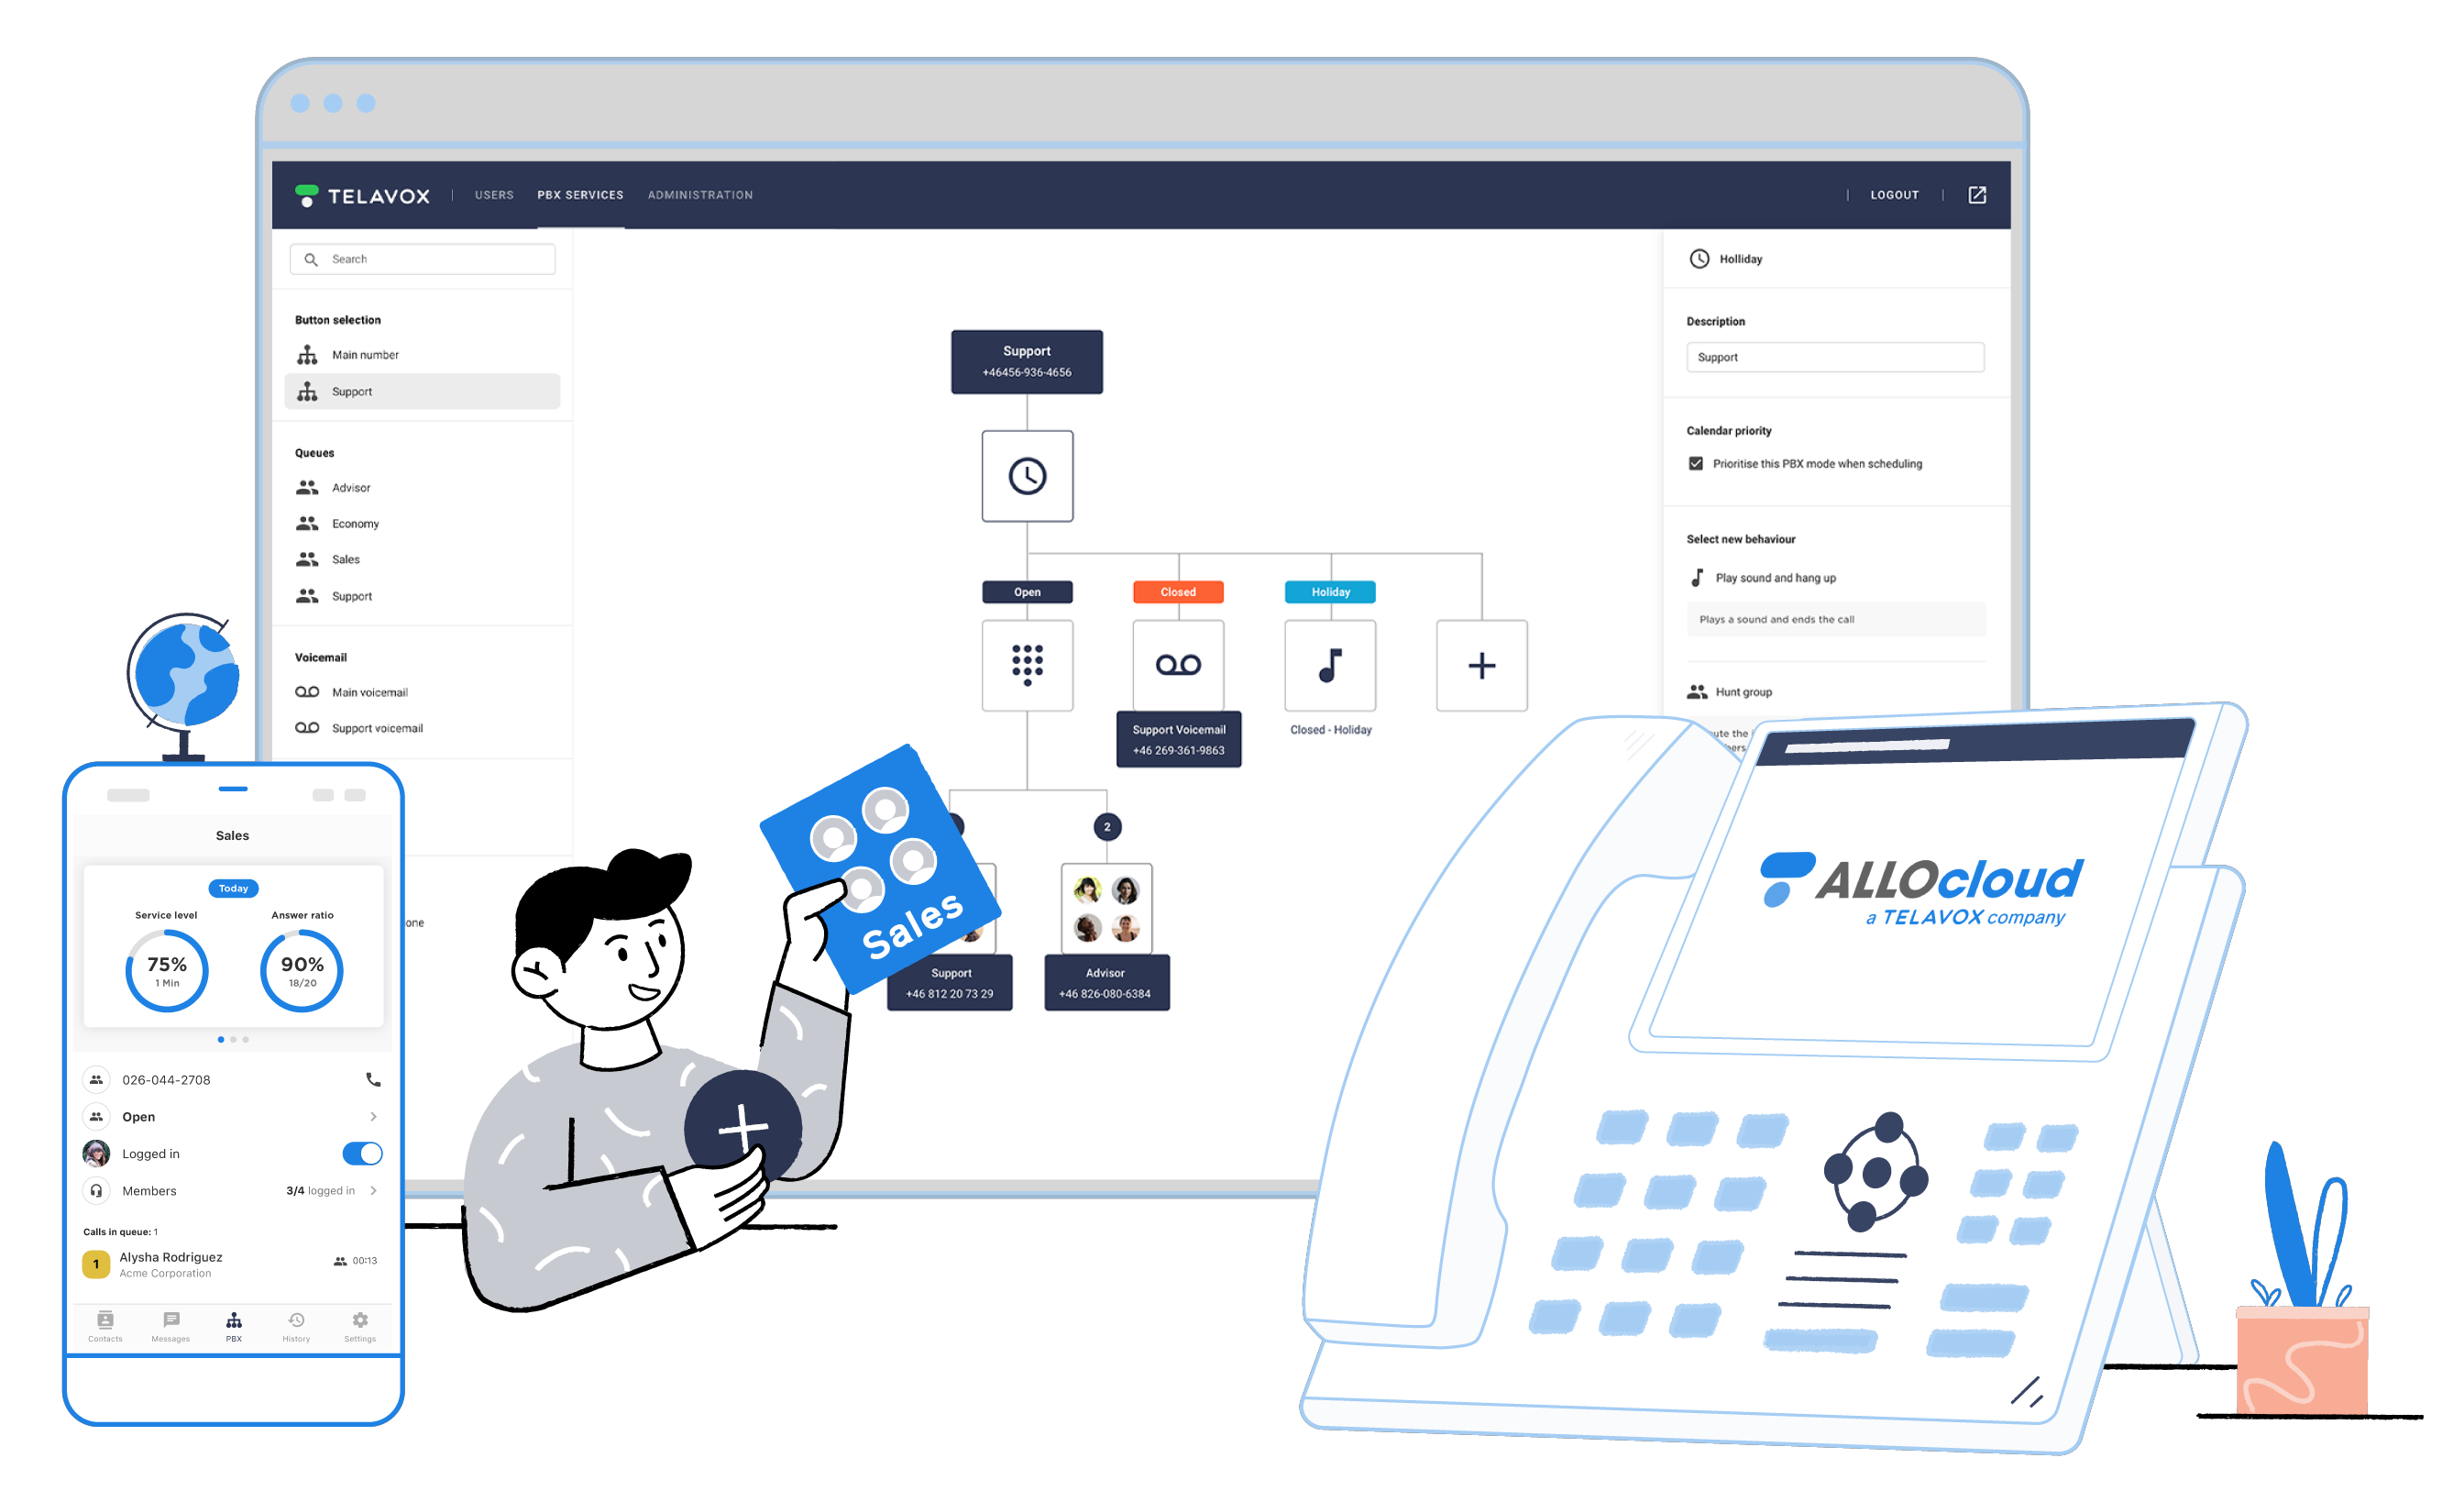 ALLOcloud - Unified Communications